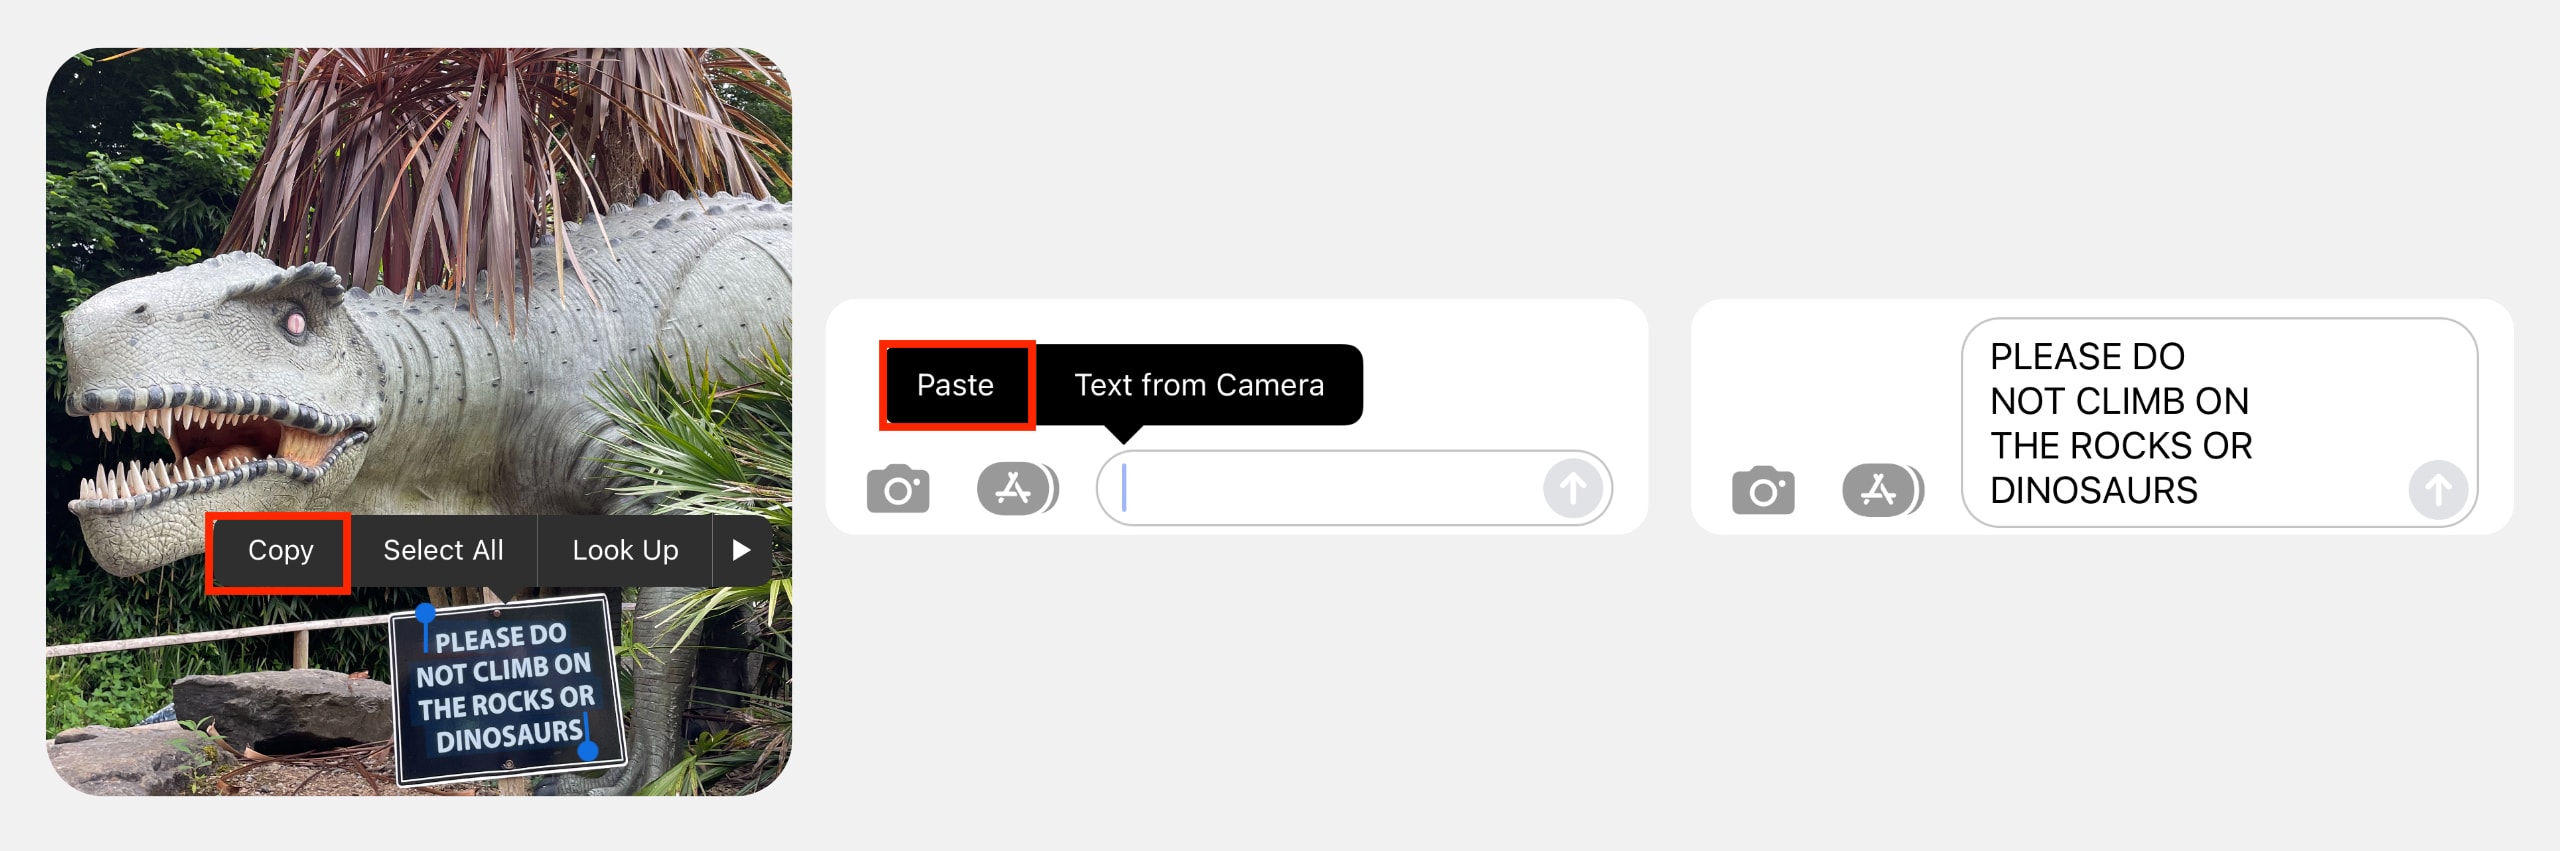 How to copy and paste from photos in iOS 15